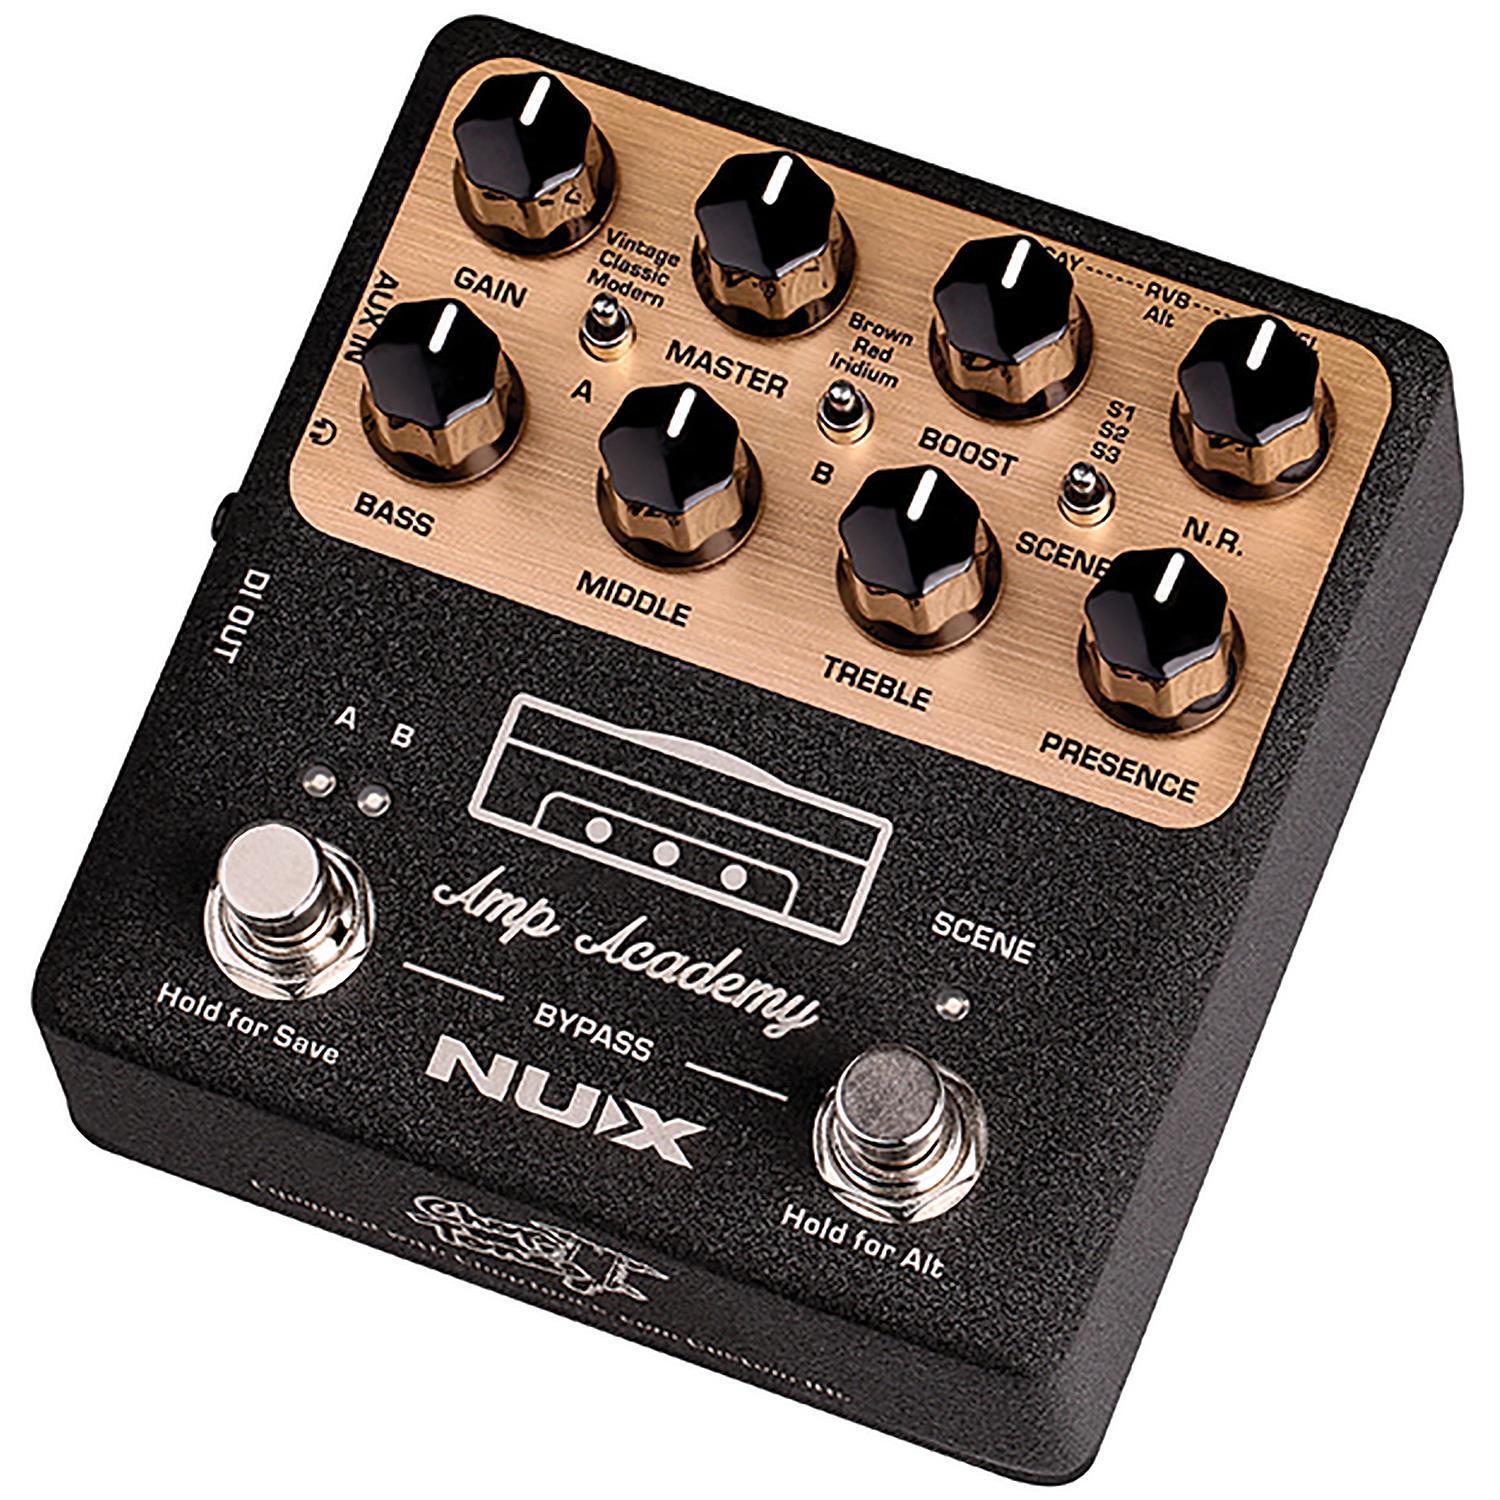 NUX Amp Academy Pedal - DY Pro Audio